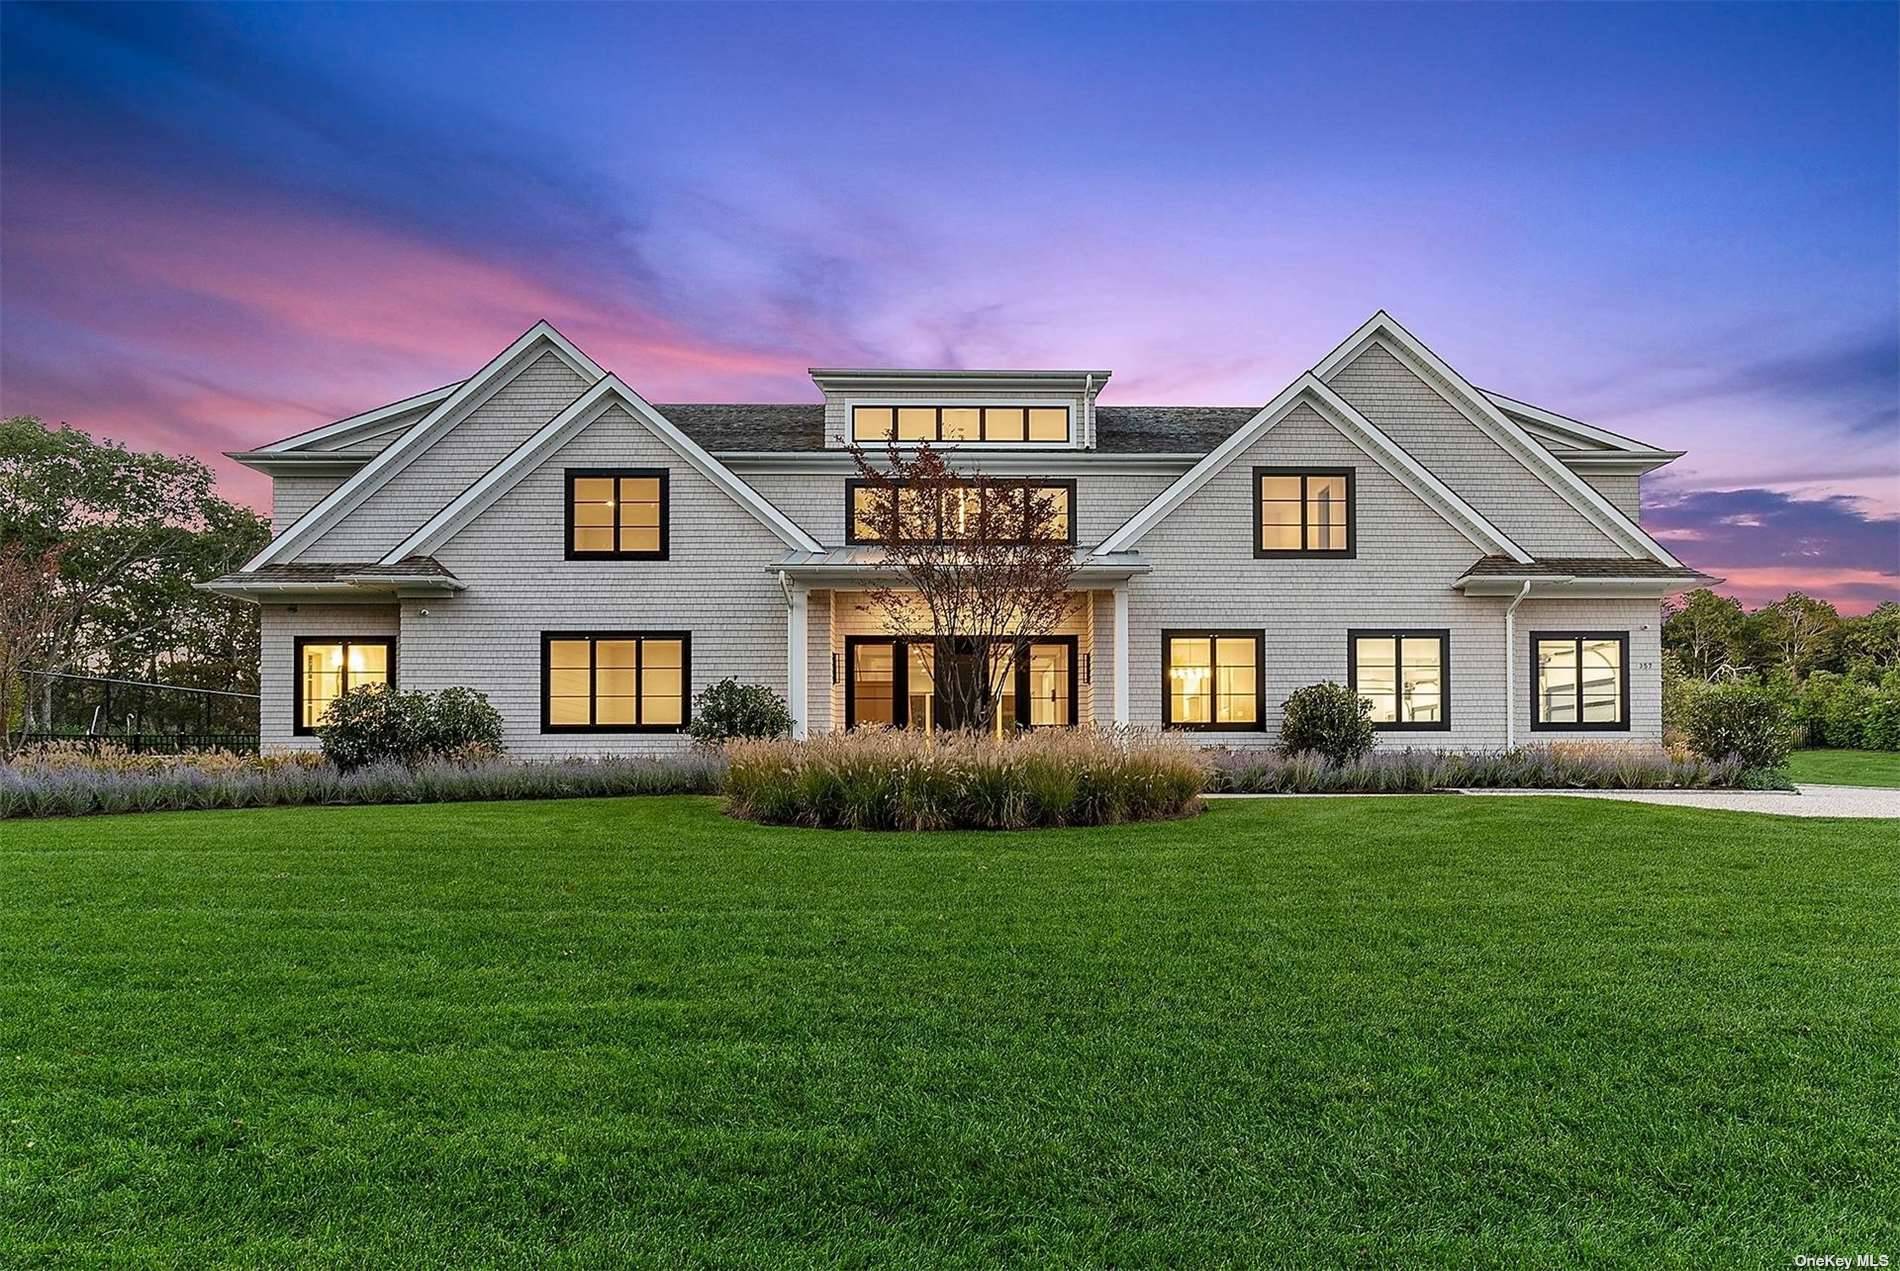 Sitting on nearly 5 private acres, this new construction is a classically inspired masterpiece with farm views.